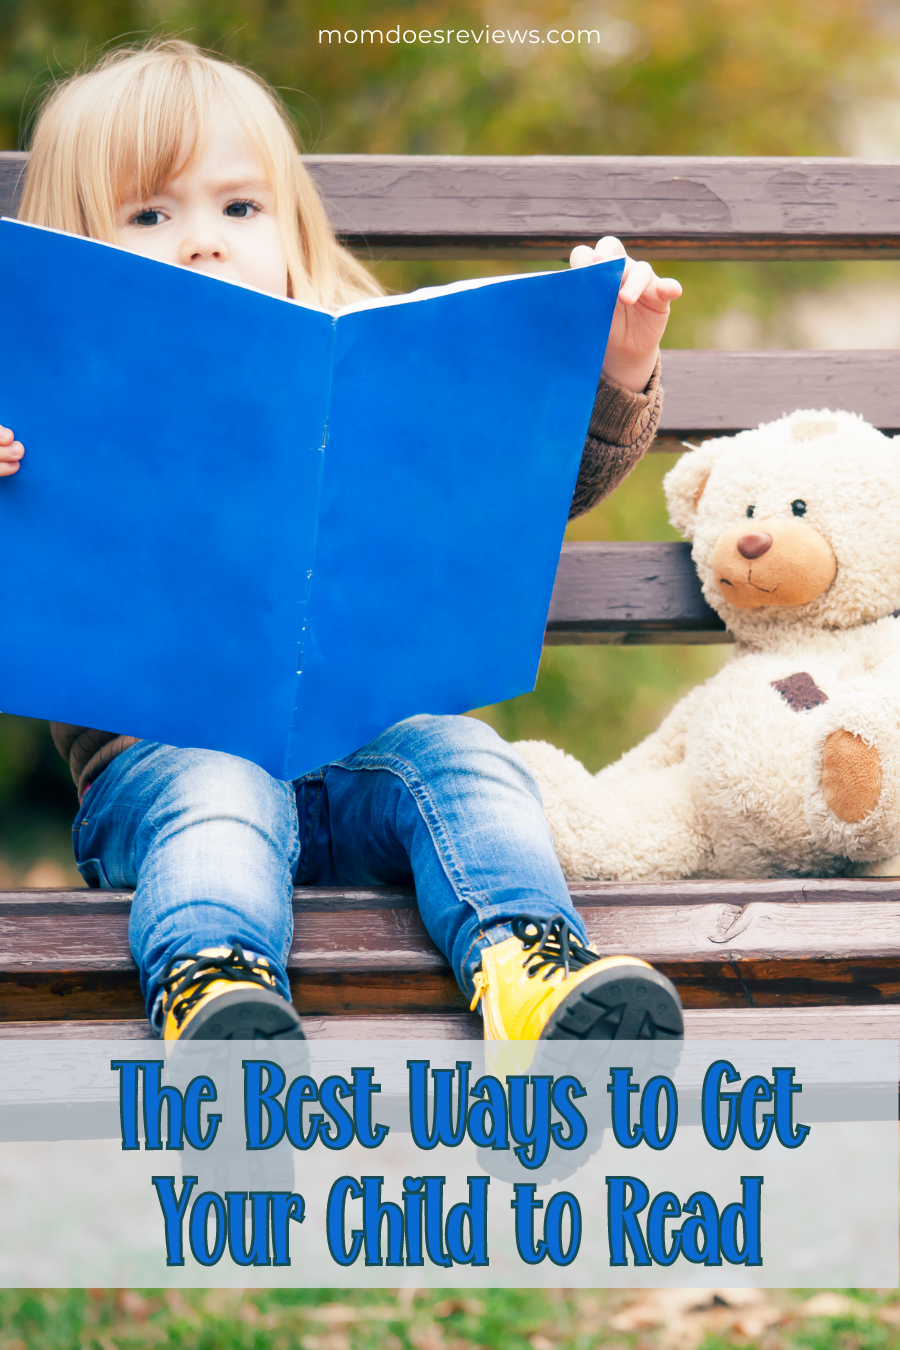 The Best Ways to Get Your Child to Read